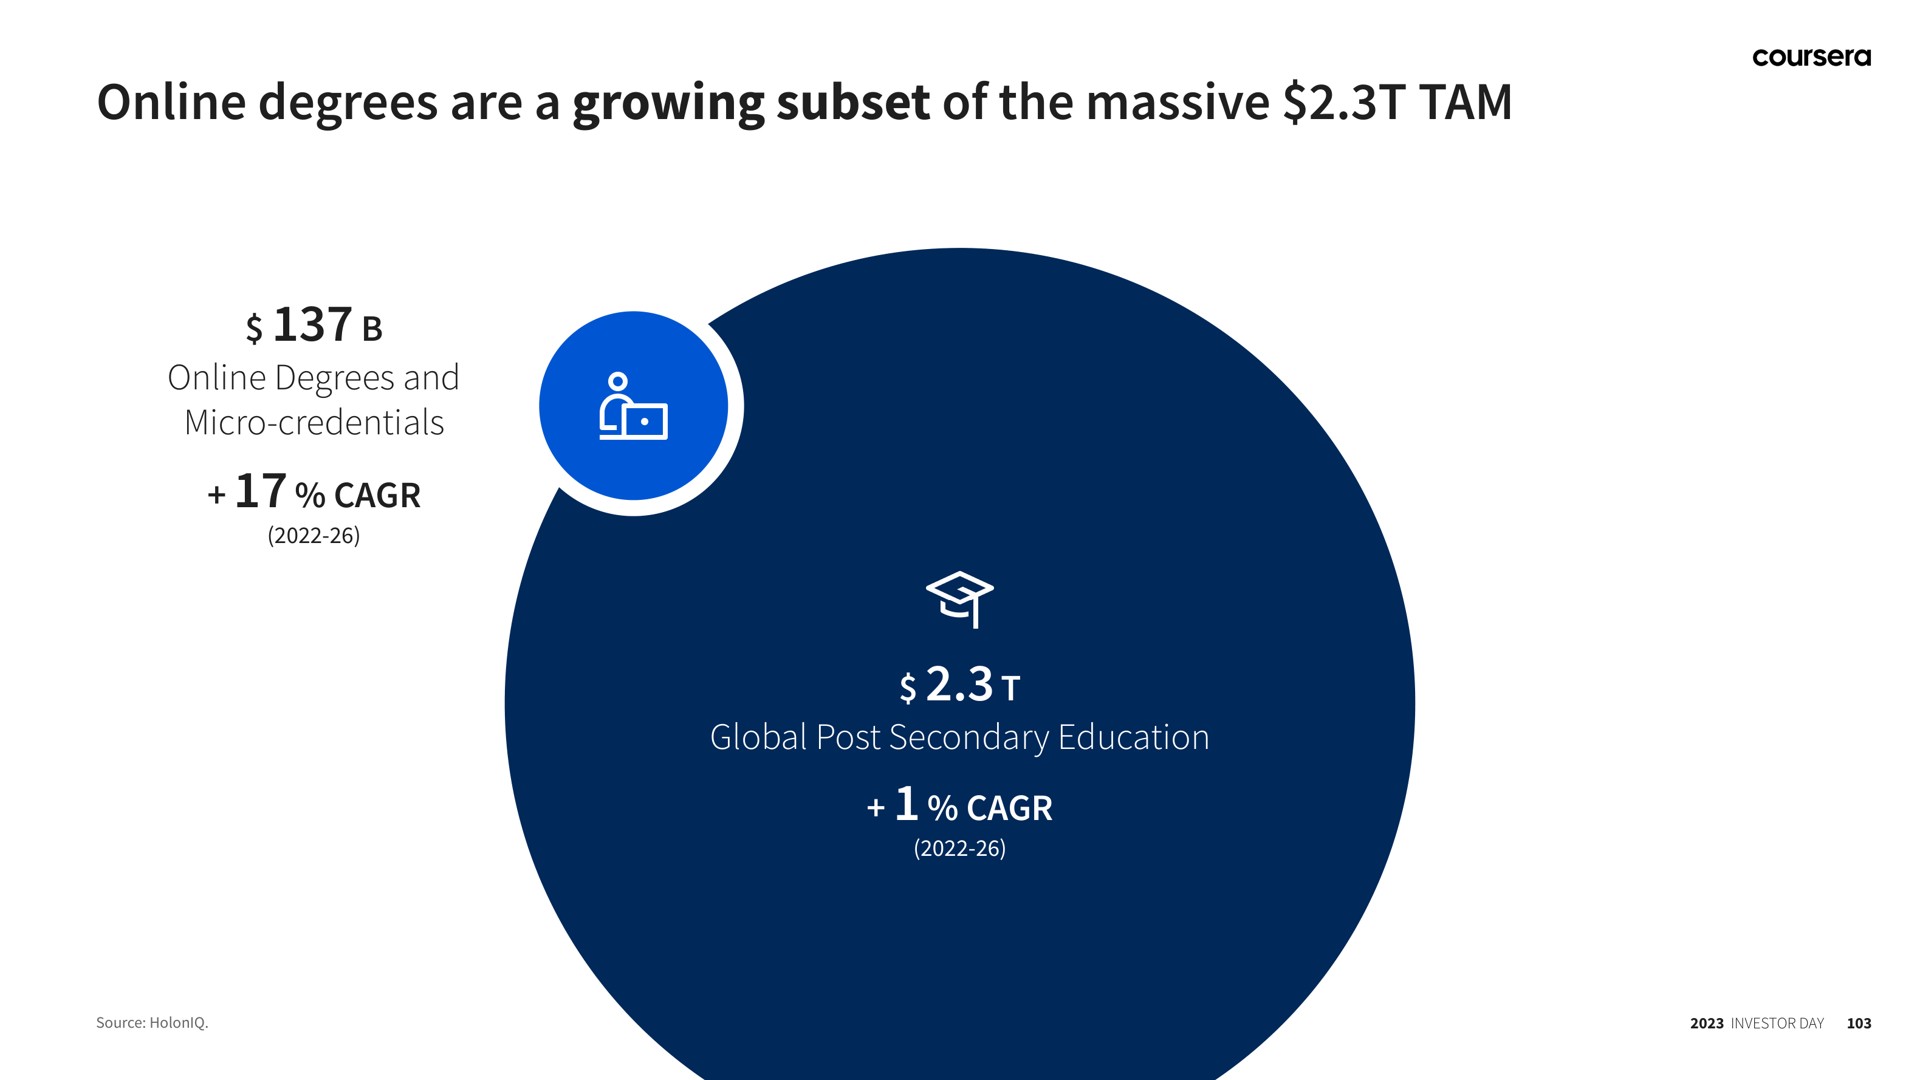 degrees are a growing subset of the massive tam | Coursera